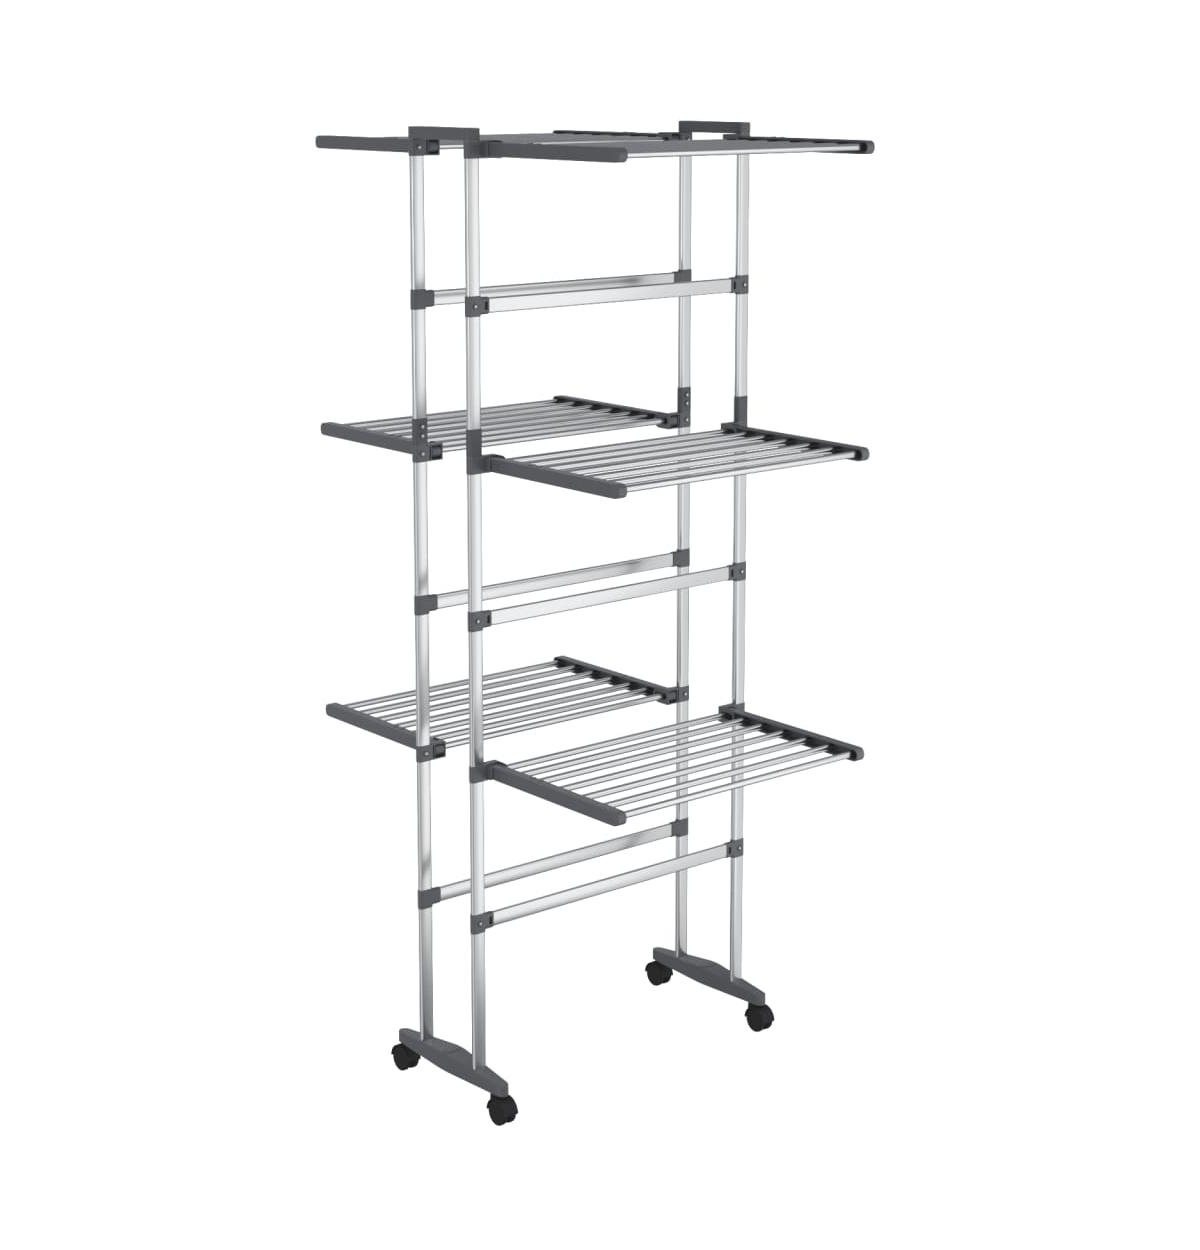 3-Tier Laundry Drying Rack with Wheels Silver 23.6"x27.6"x50.8" - Silver